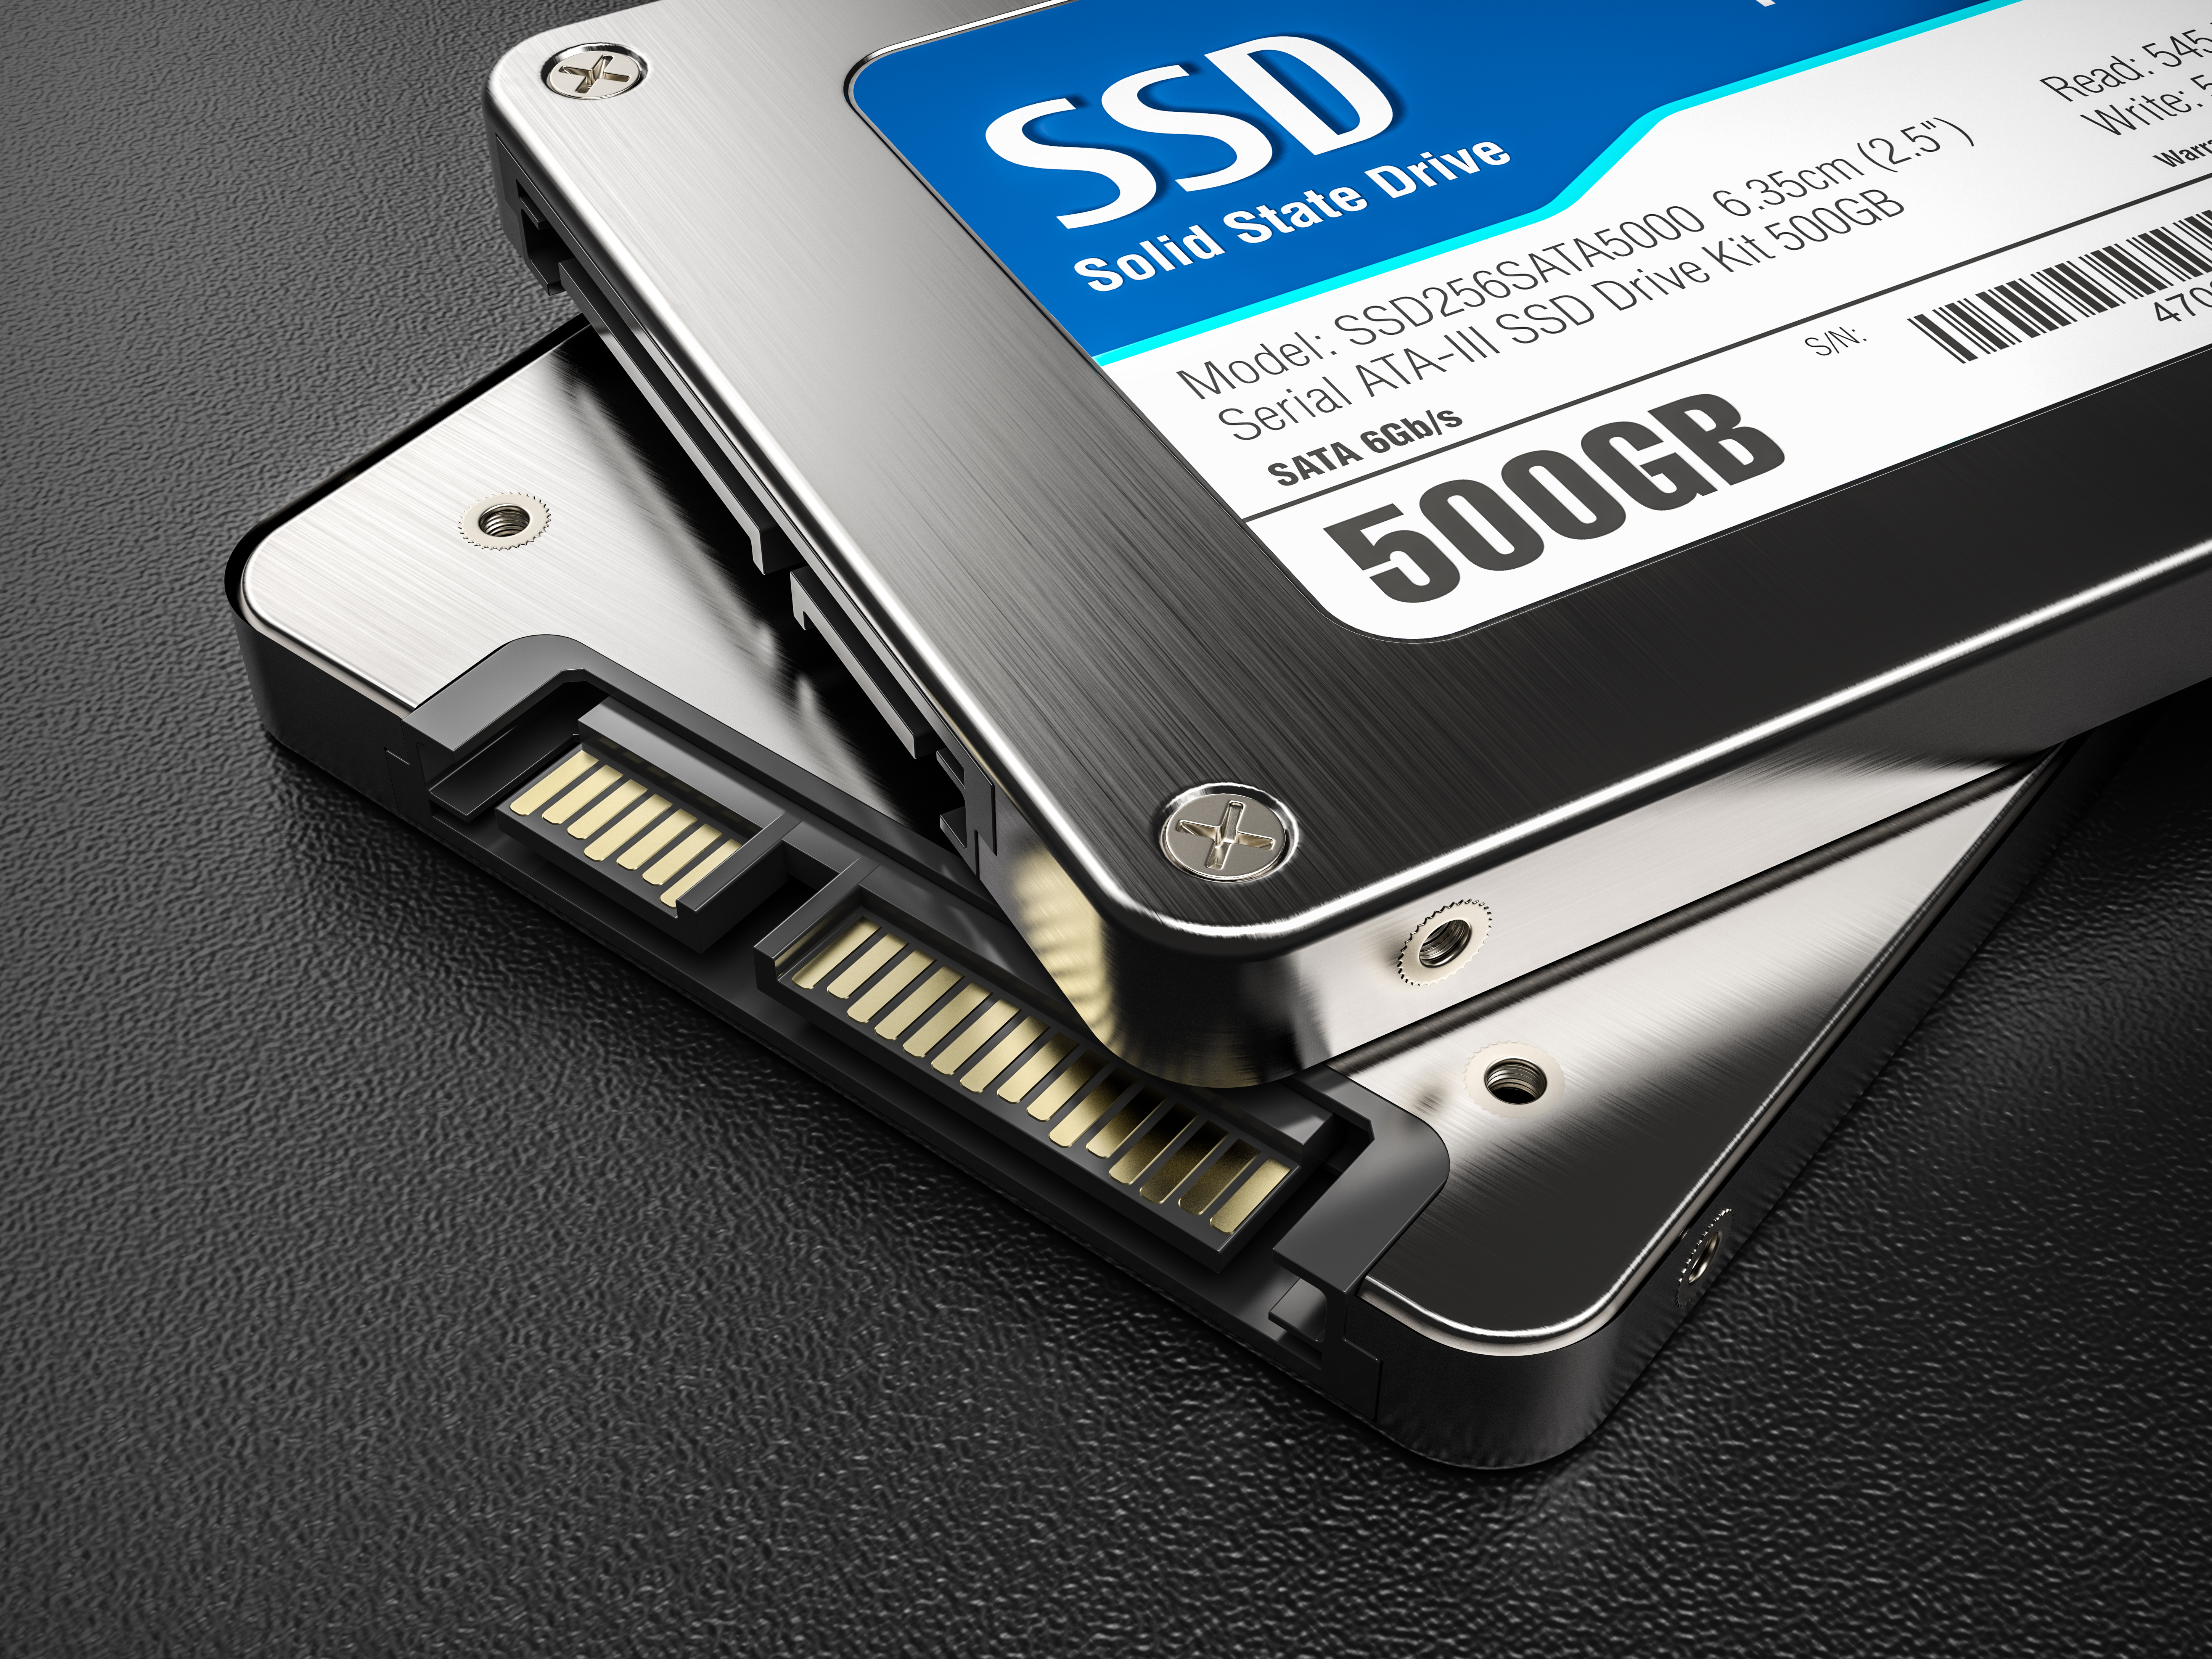 SSD size affect speed in gaming? - Newegg Insider